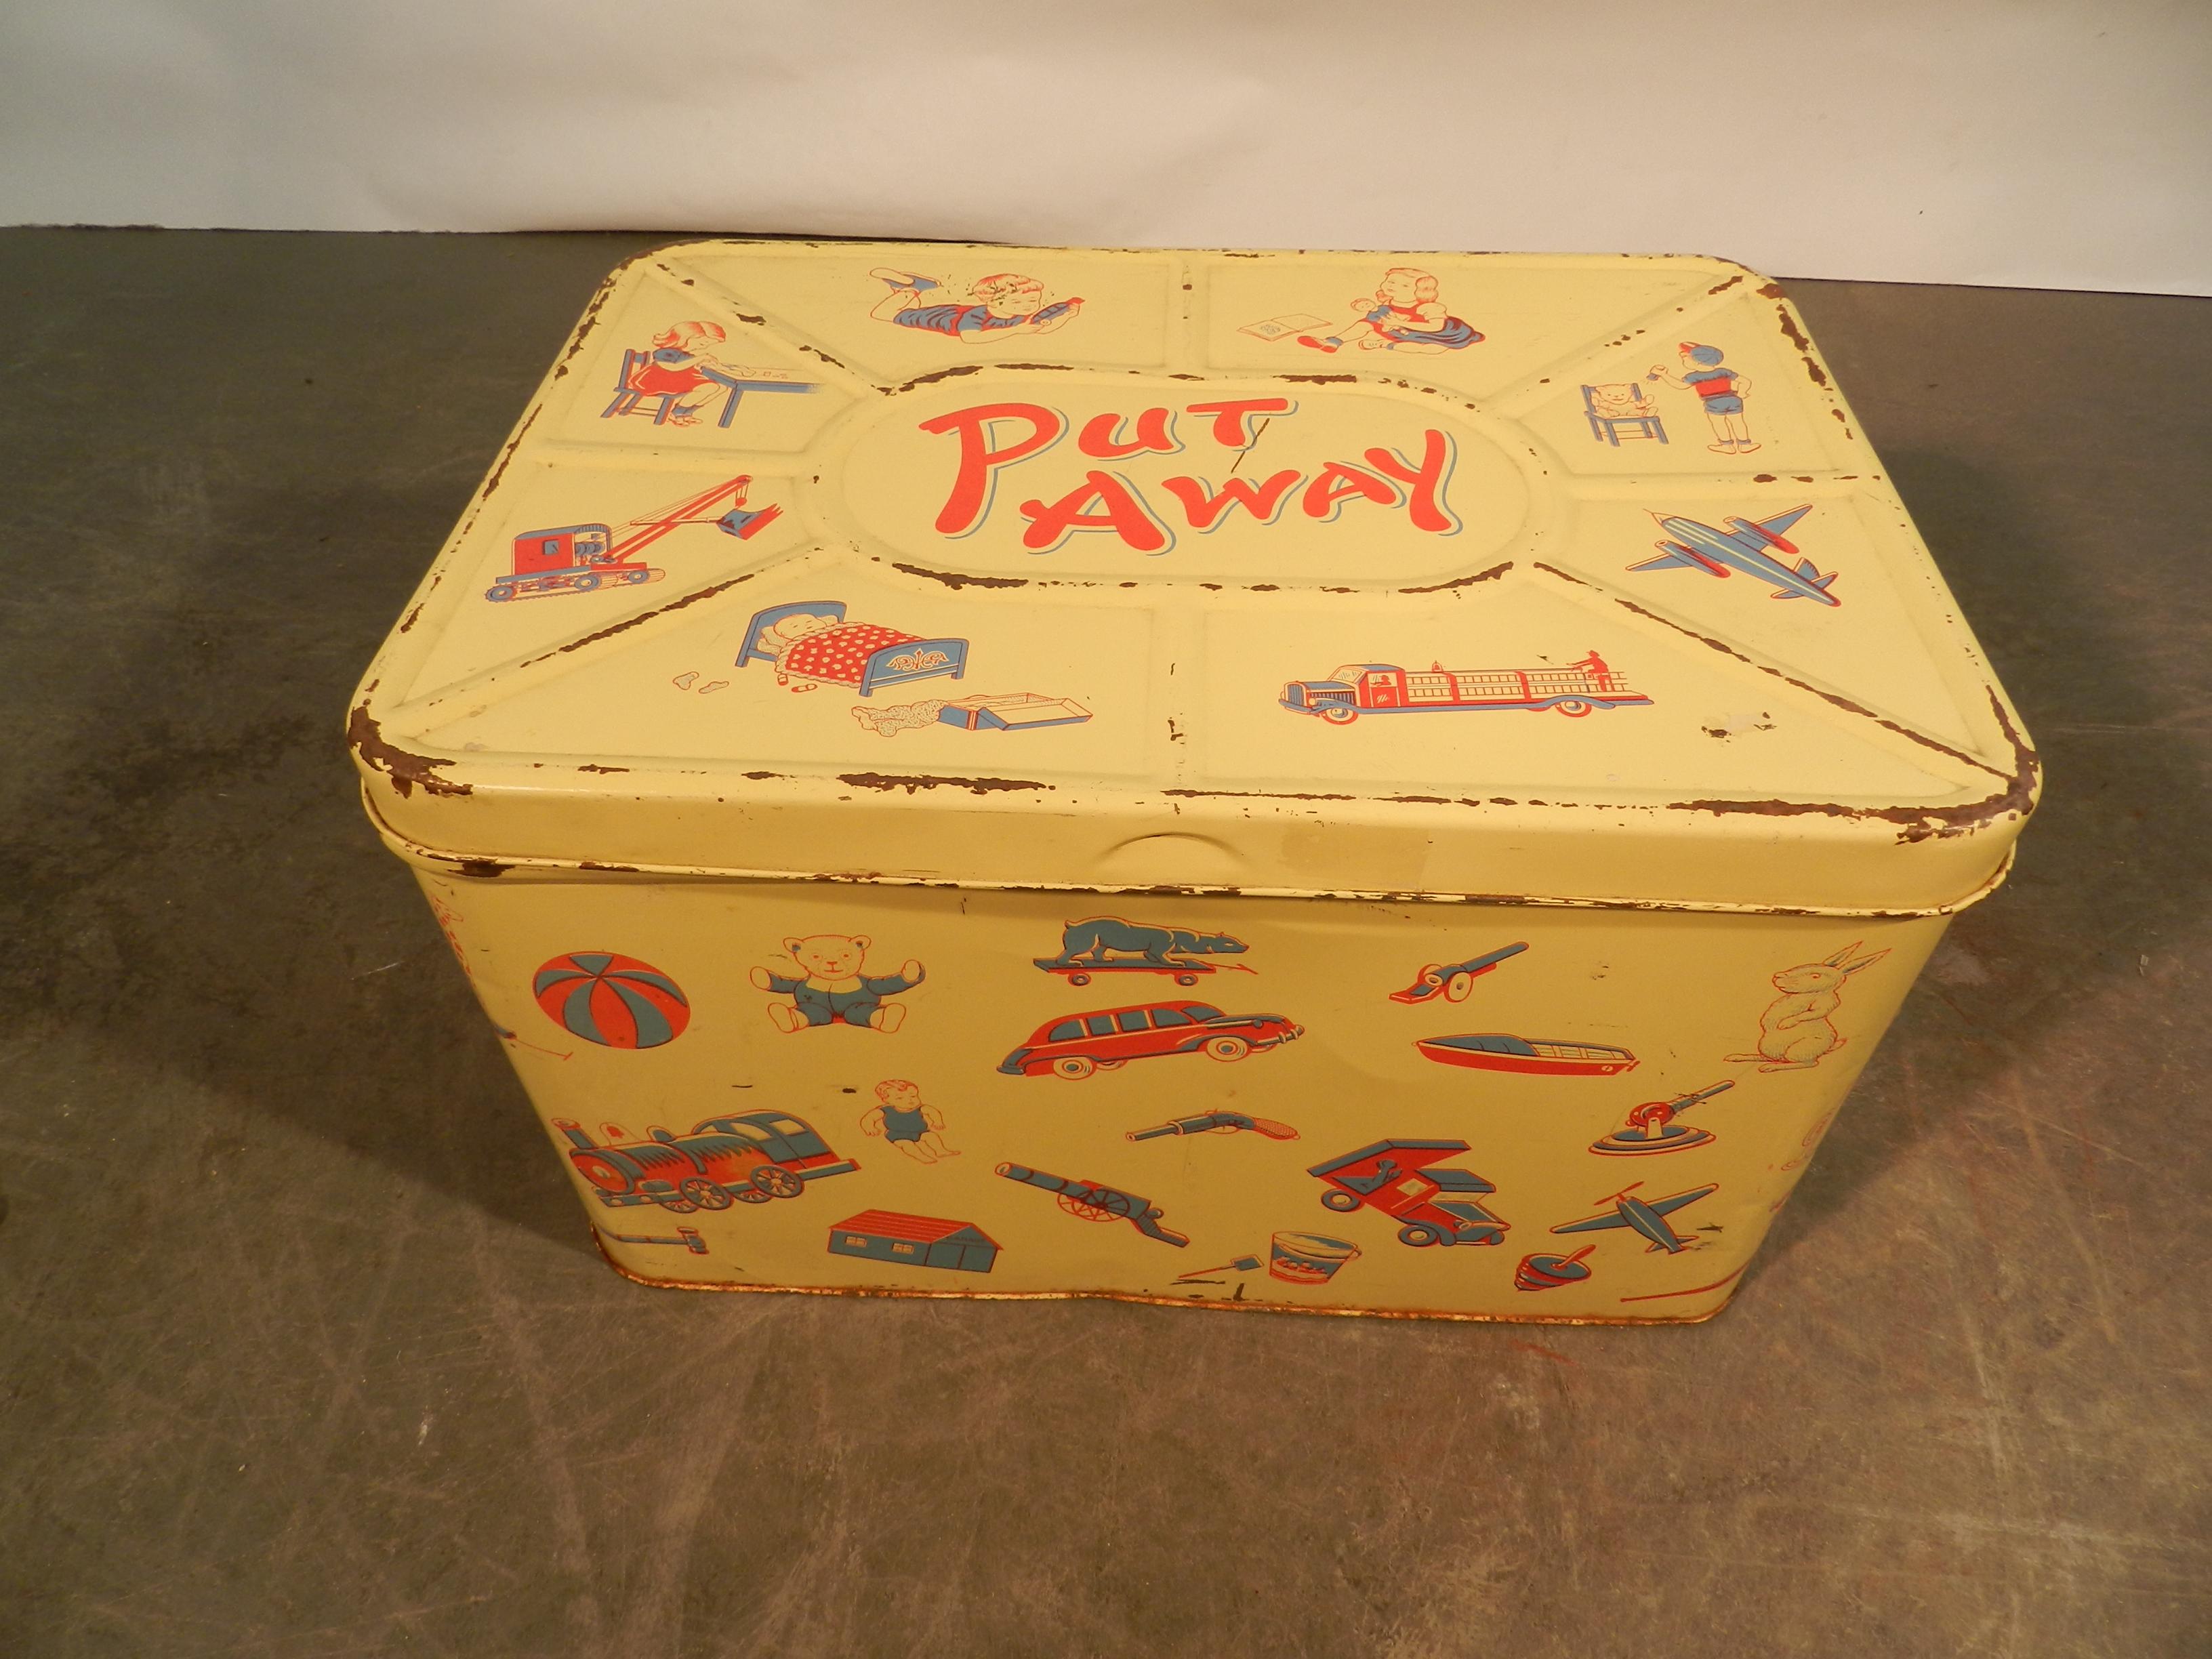 Putaway, vintage toy chest in lacquered metal, circa 1960.